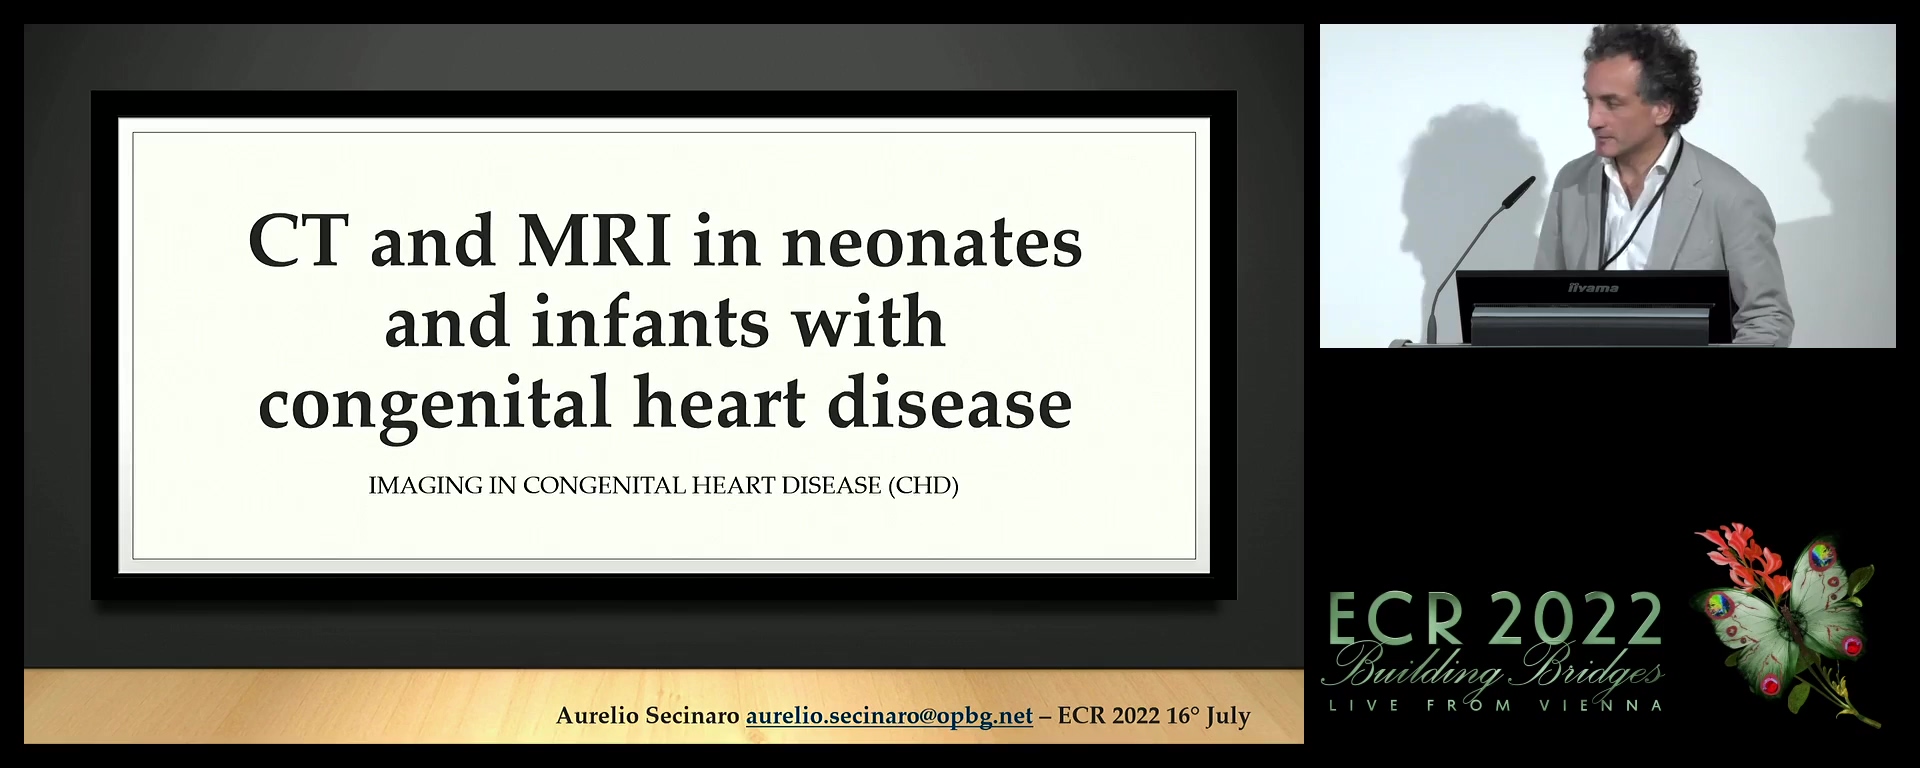 CT and MRI in neonates and infants with congenital heart disease